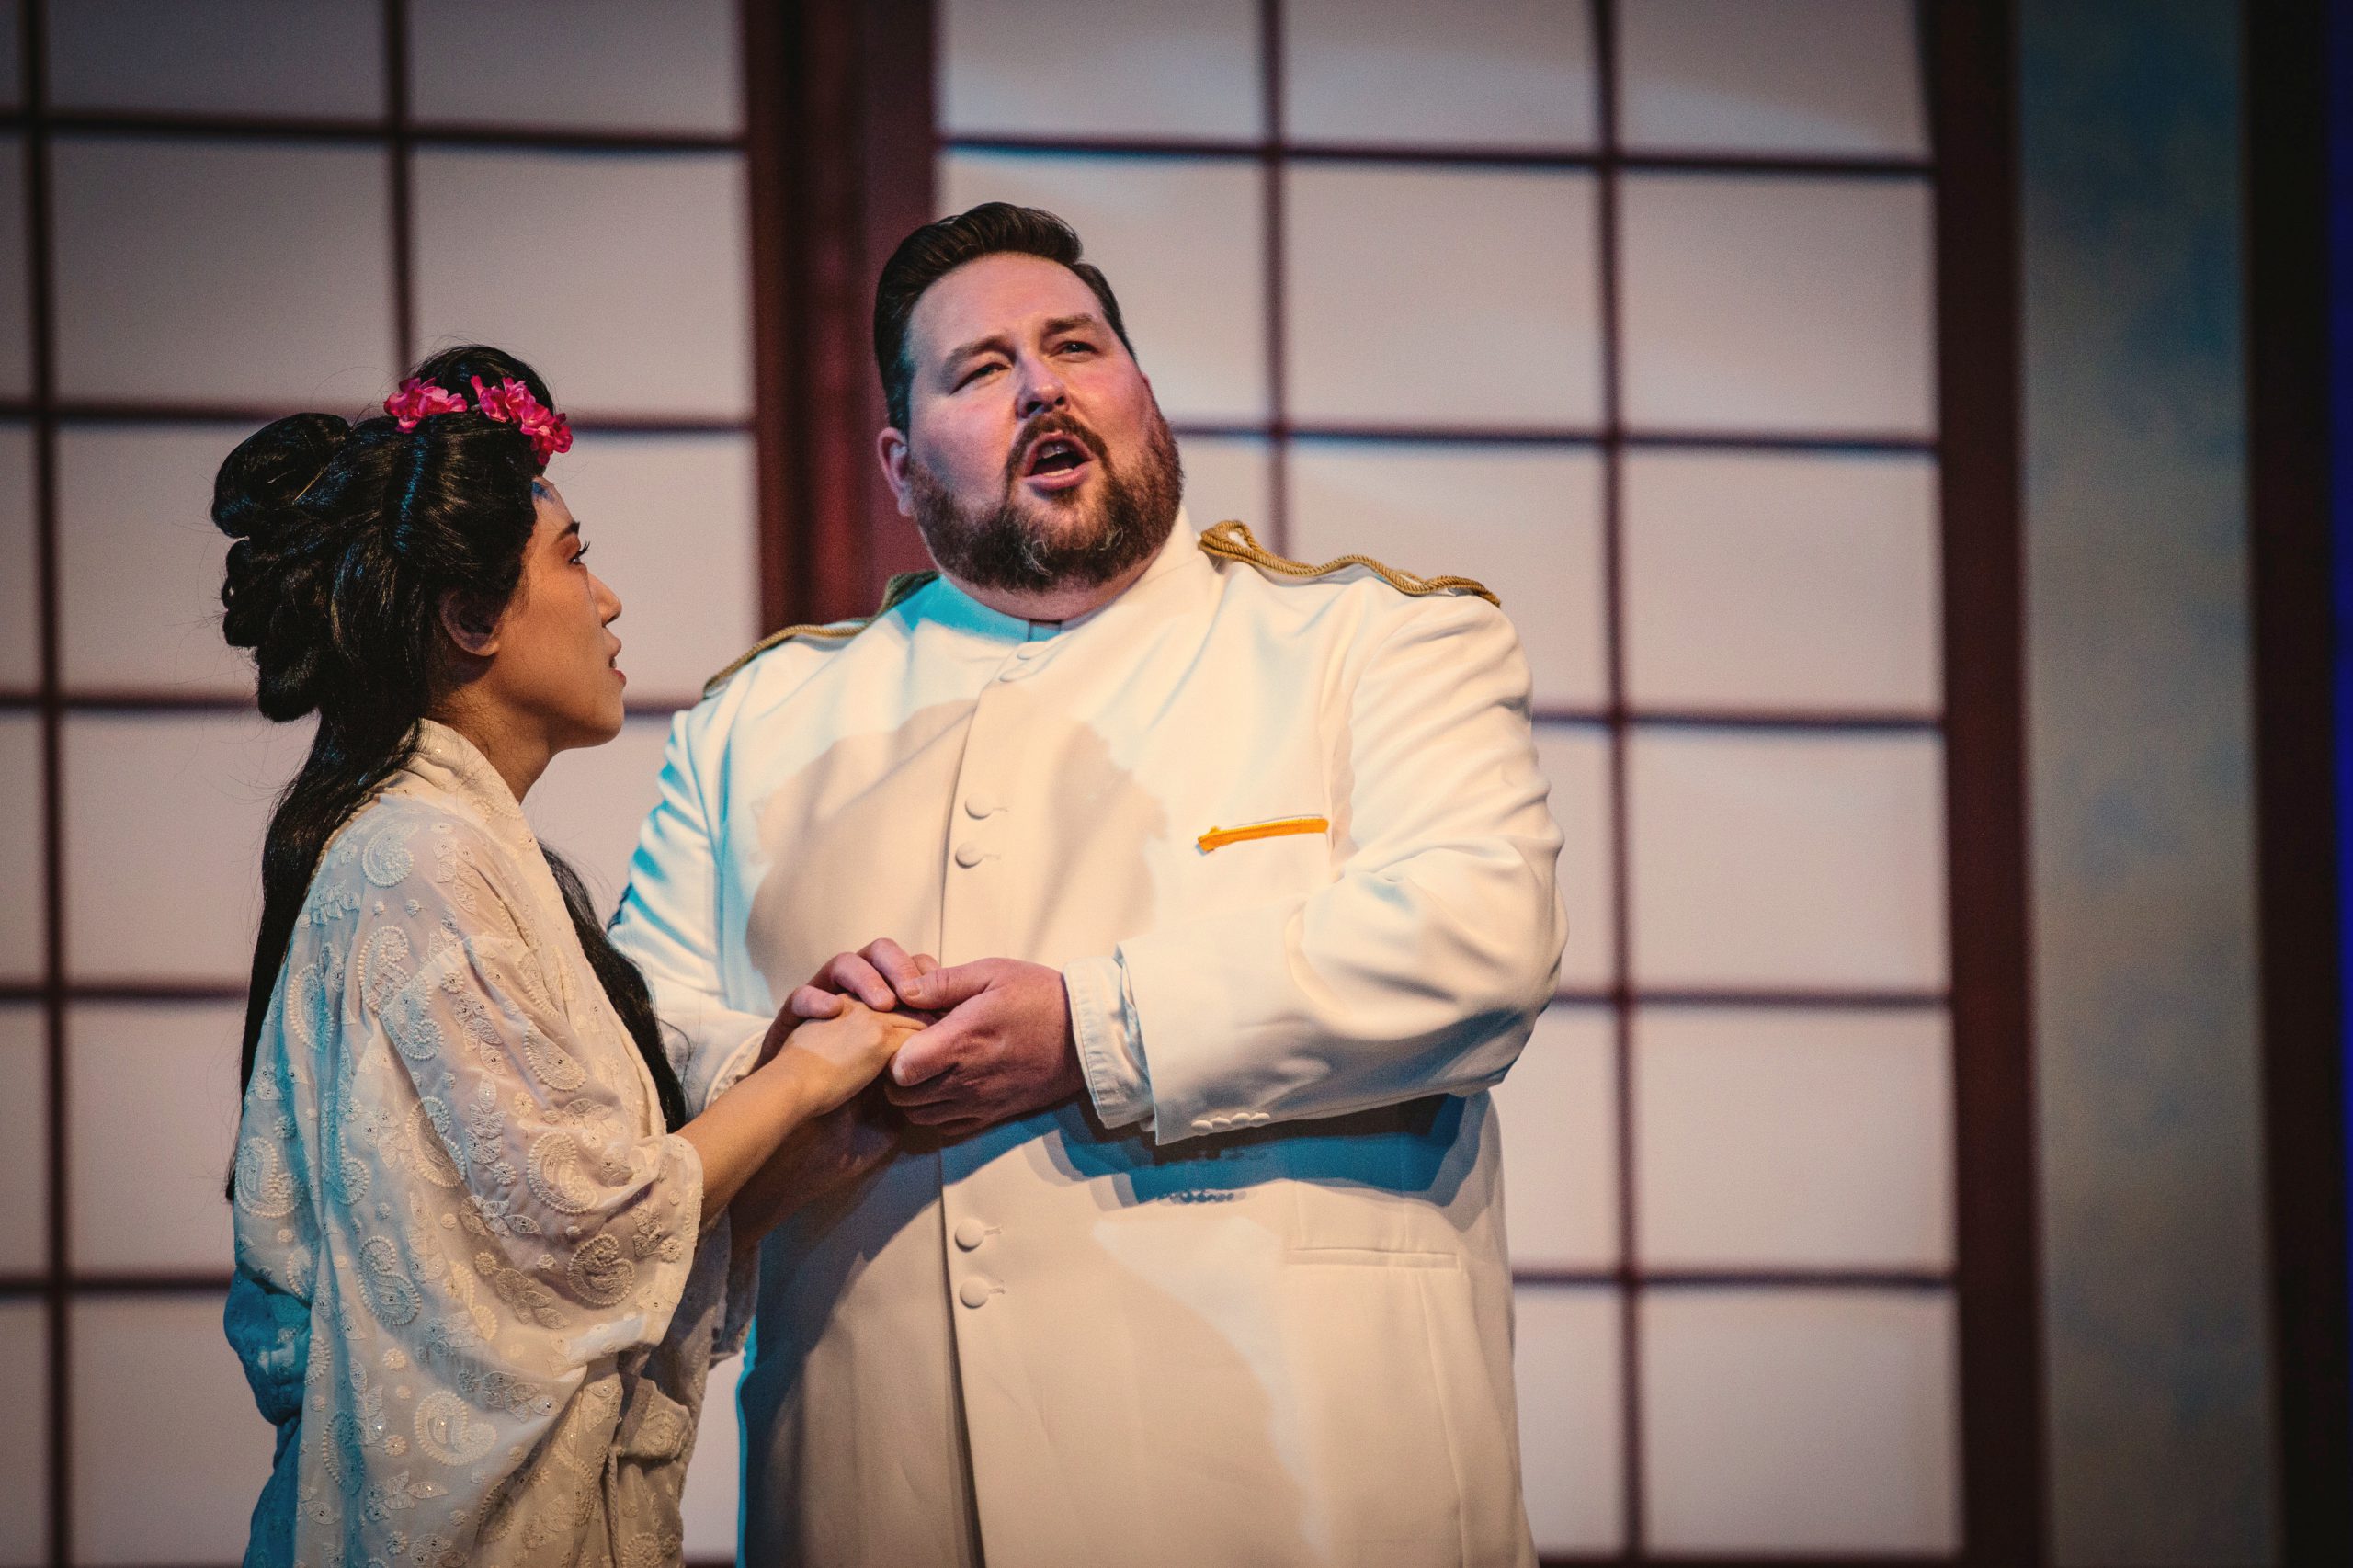 This weekend only: Les pêcheurs de perles by Georges Bizet